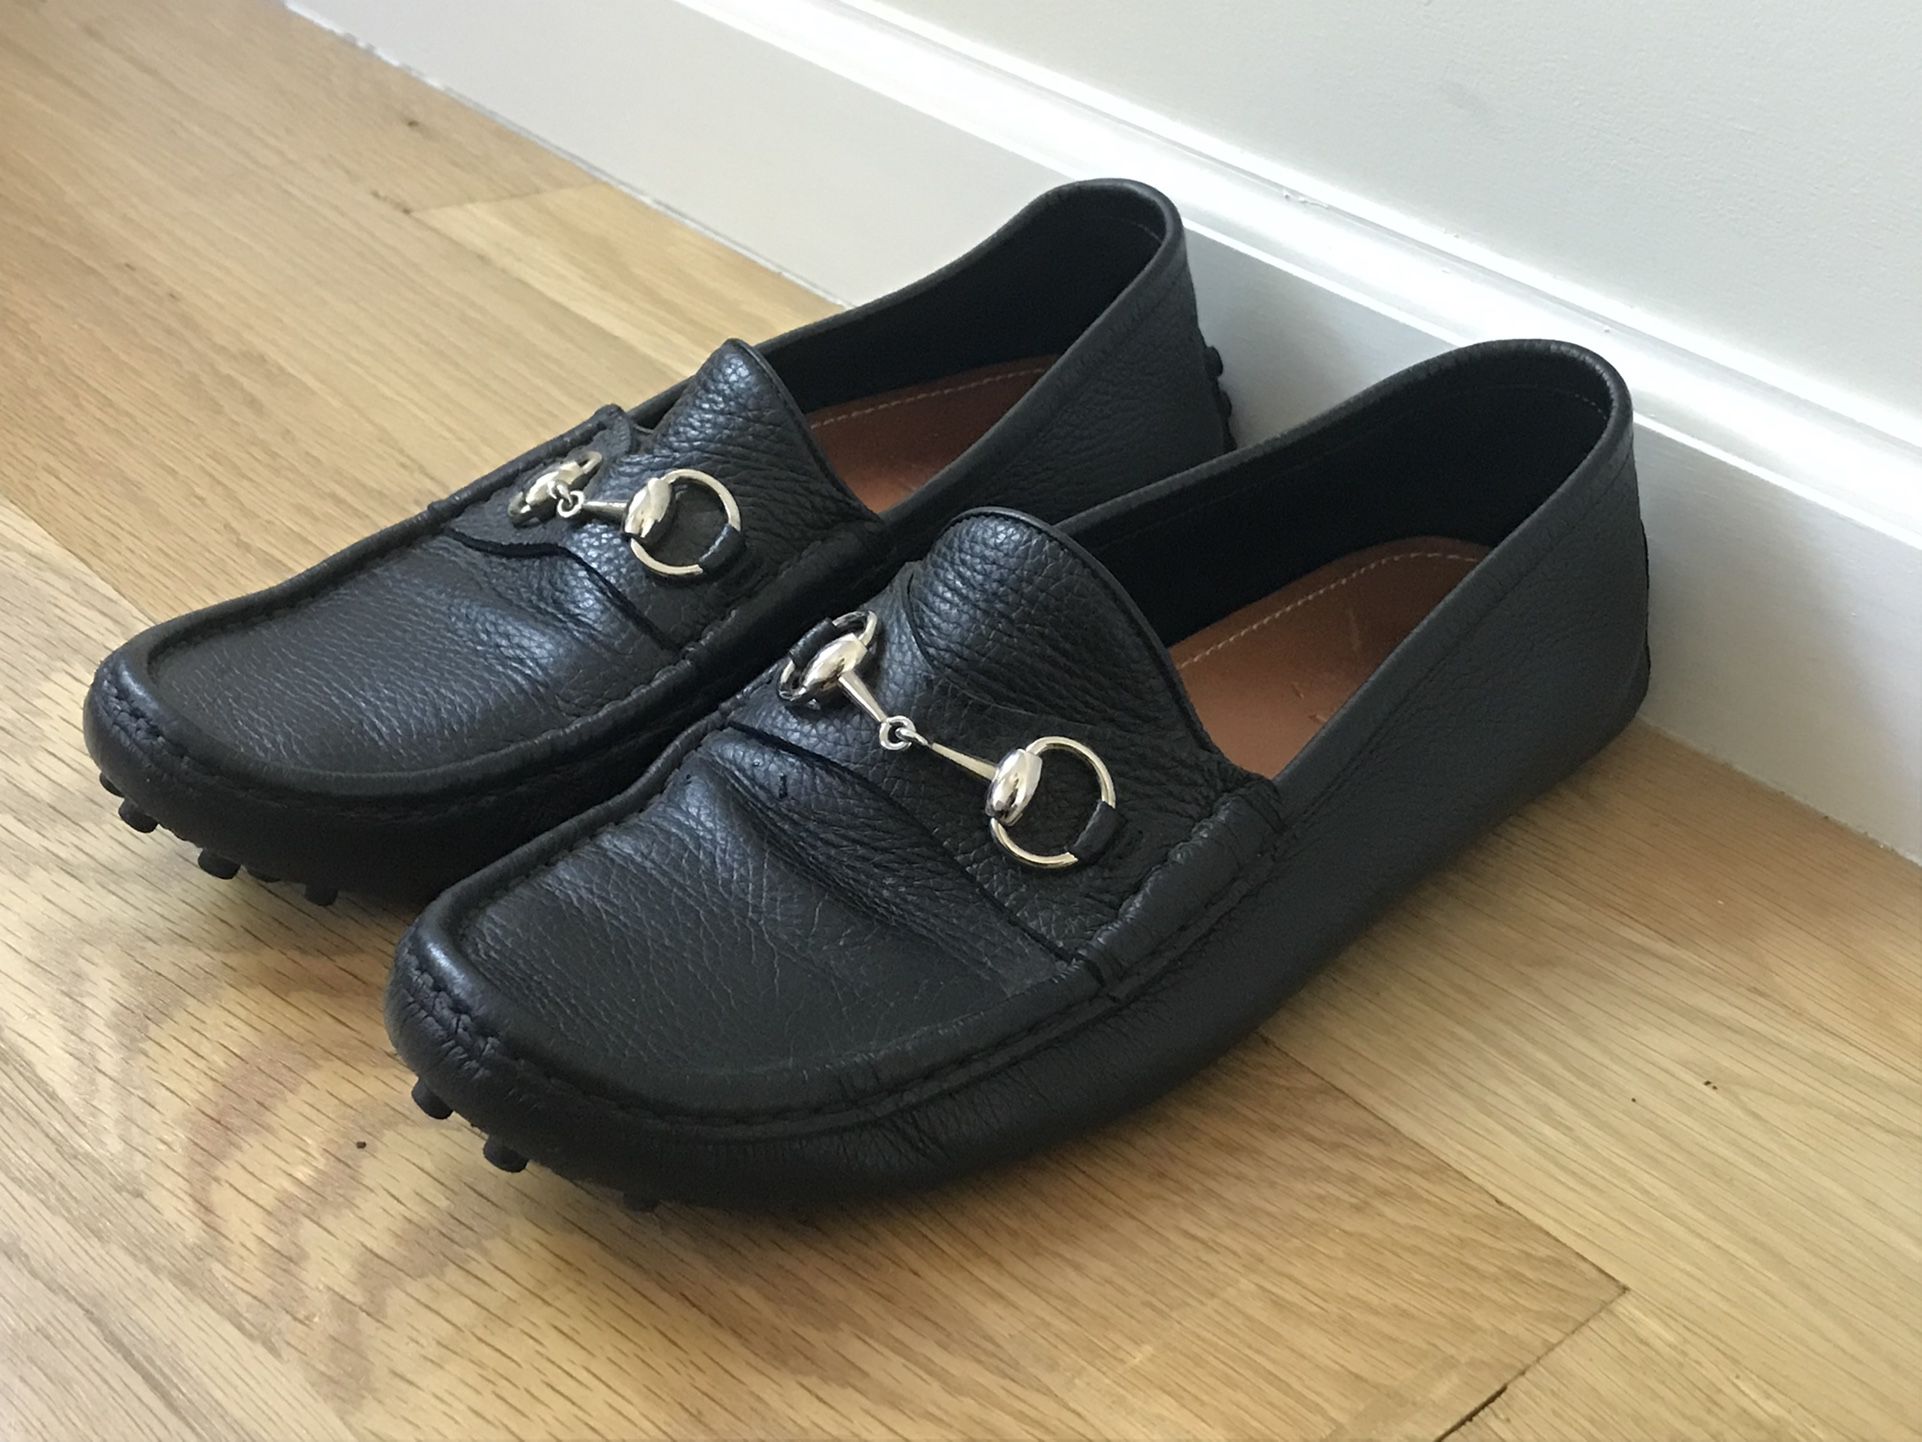 Gucci Leather Loafers